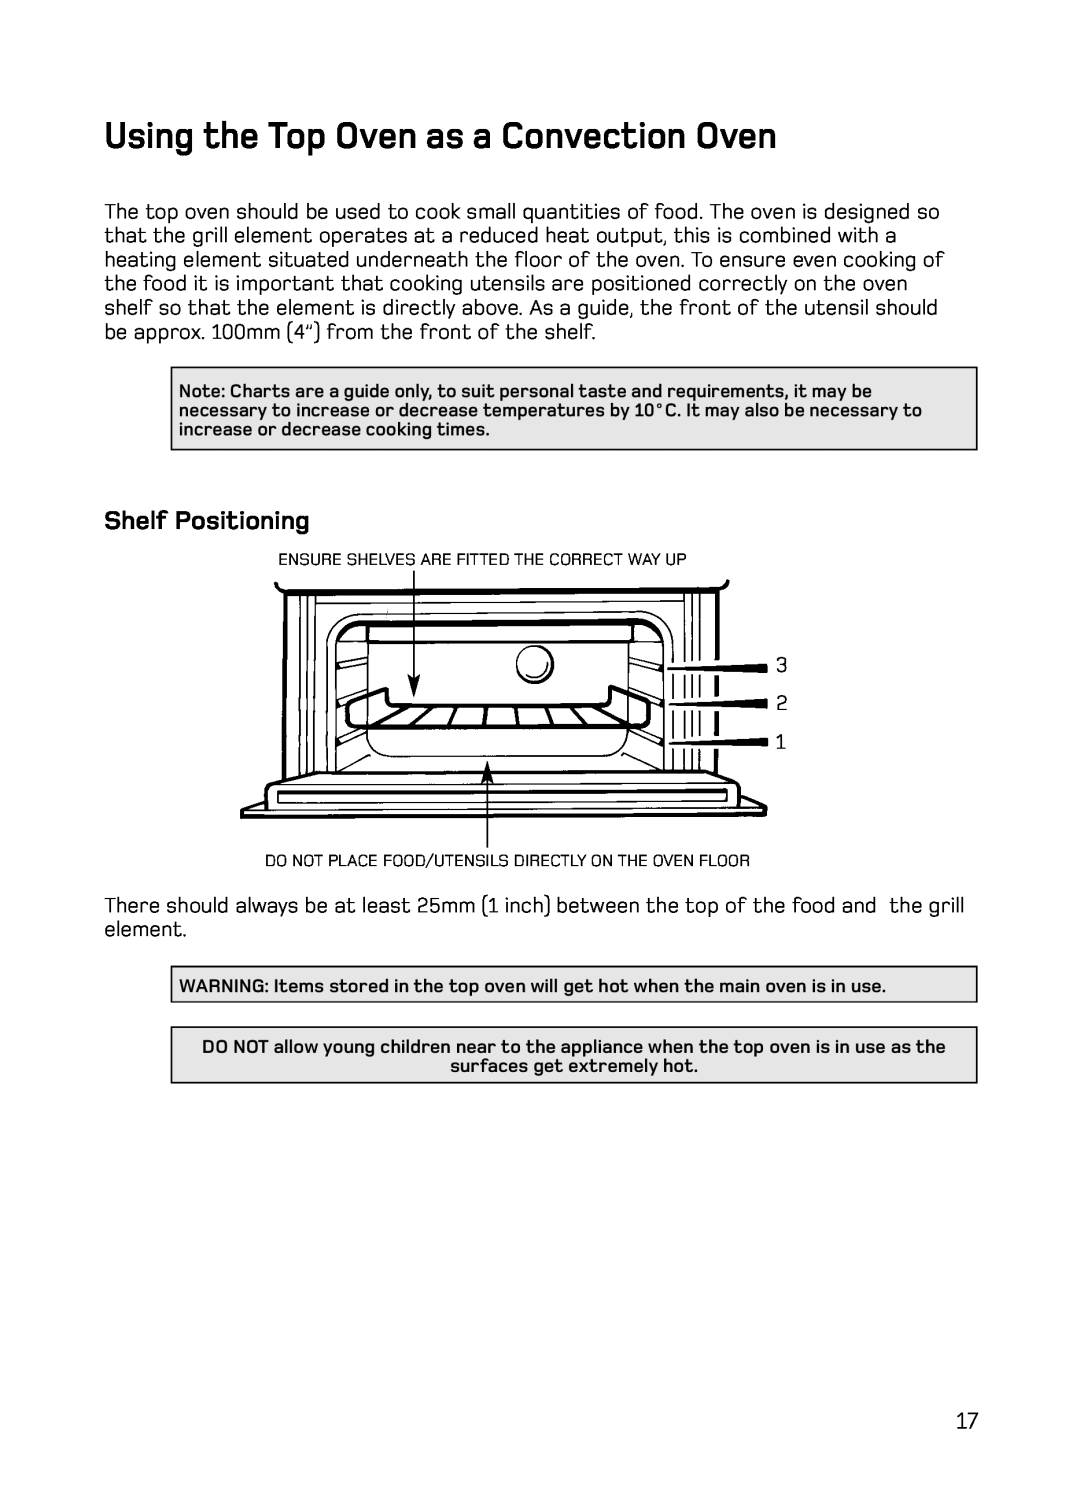 Hotpoint S130E Mk2 manual Using the Top Oven as a Convection Oven, Shelf Positioning 